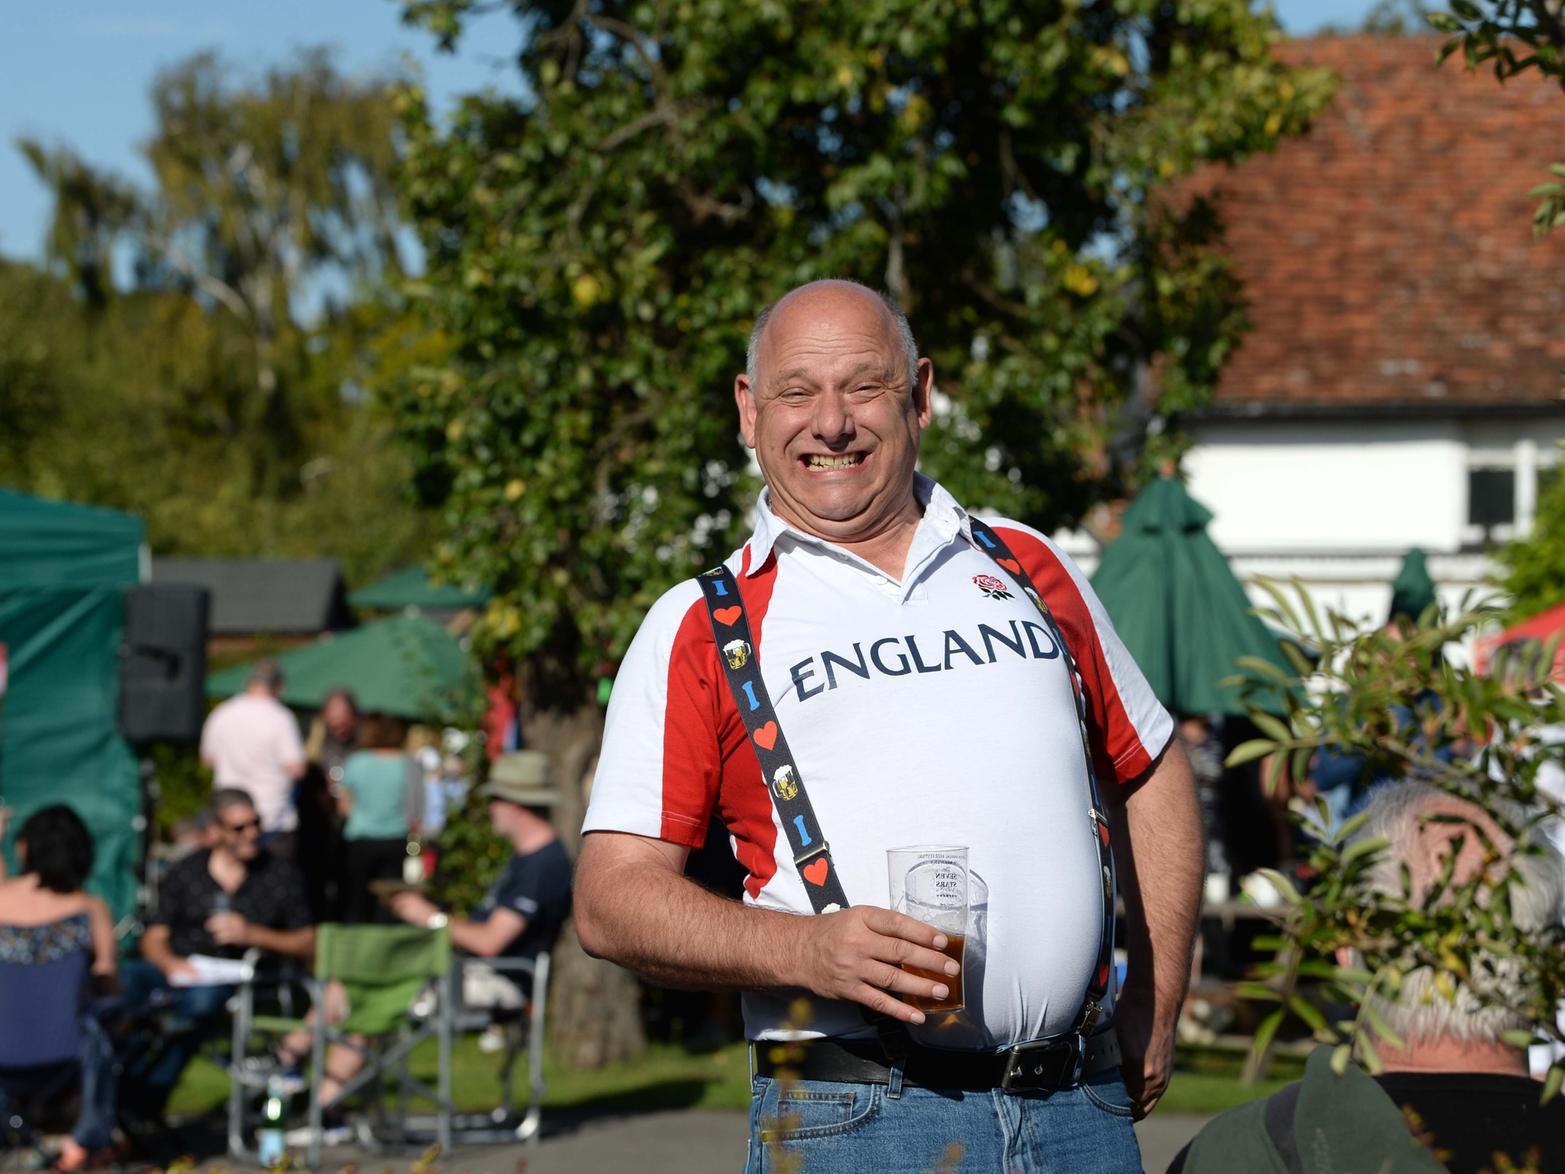 The sun also shone on revellers at the Dinton Beer Festival